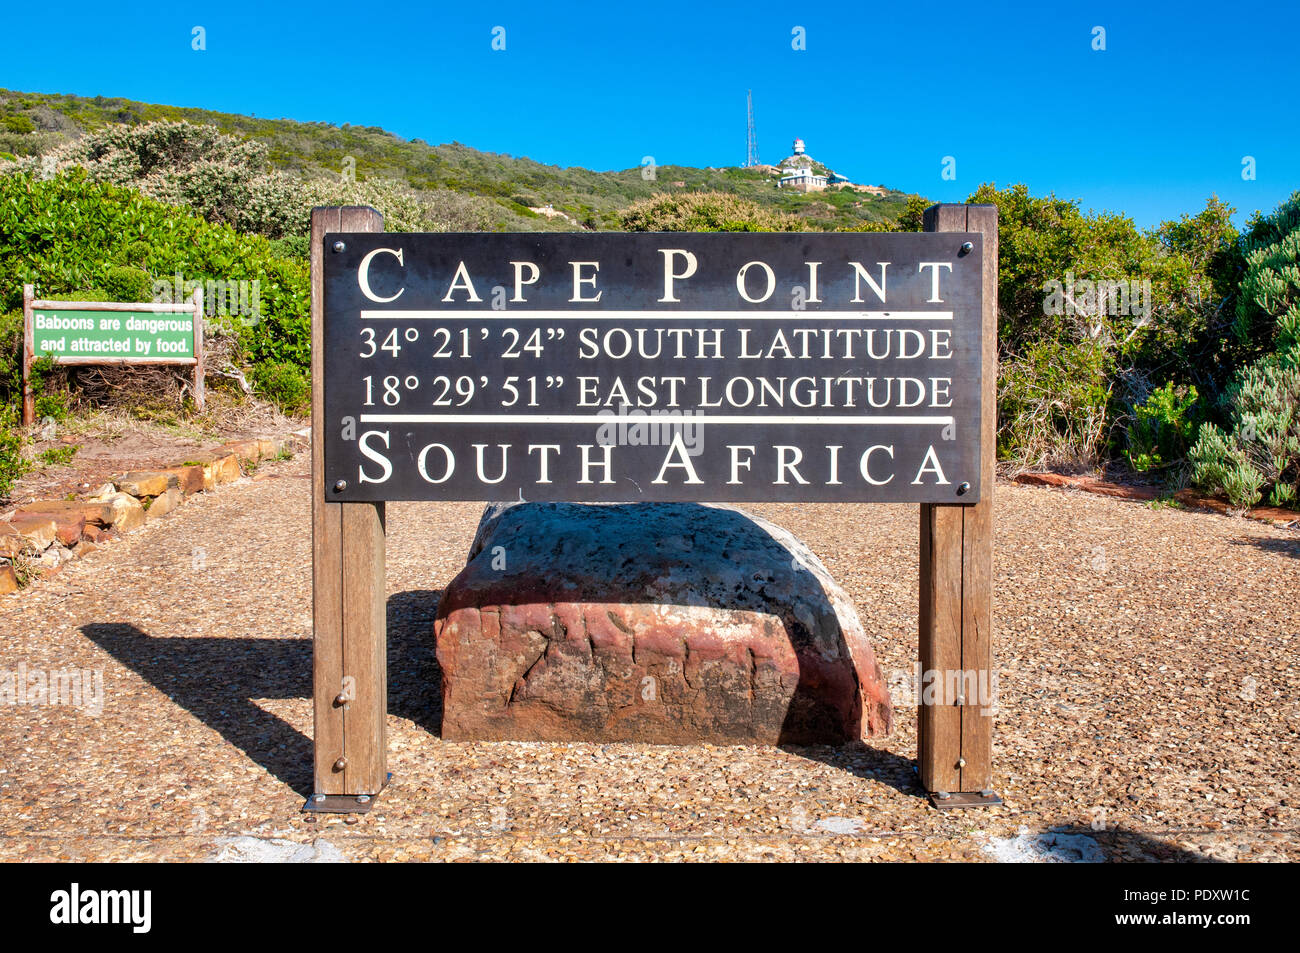 Signboard showing the coordinates of Cape Point, South Africa Stock Photo